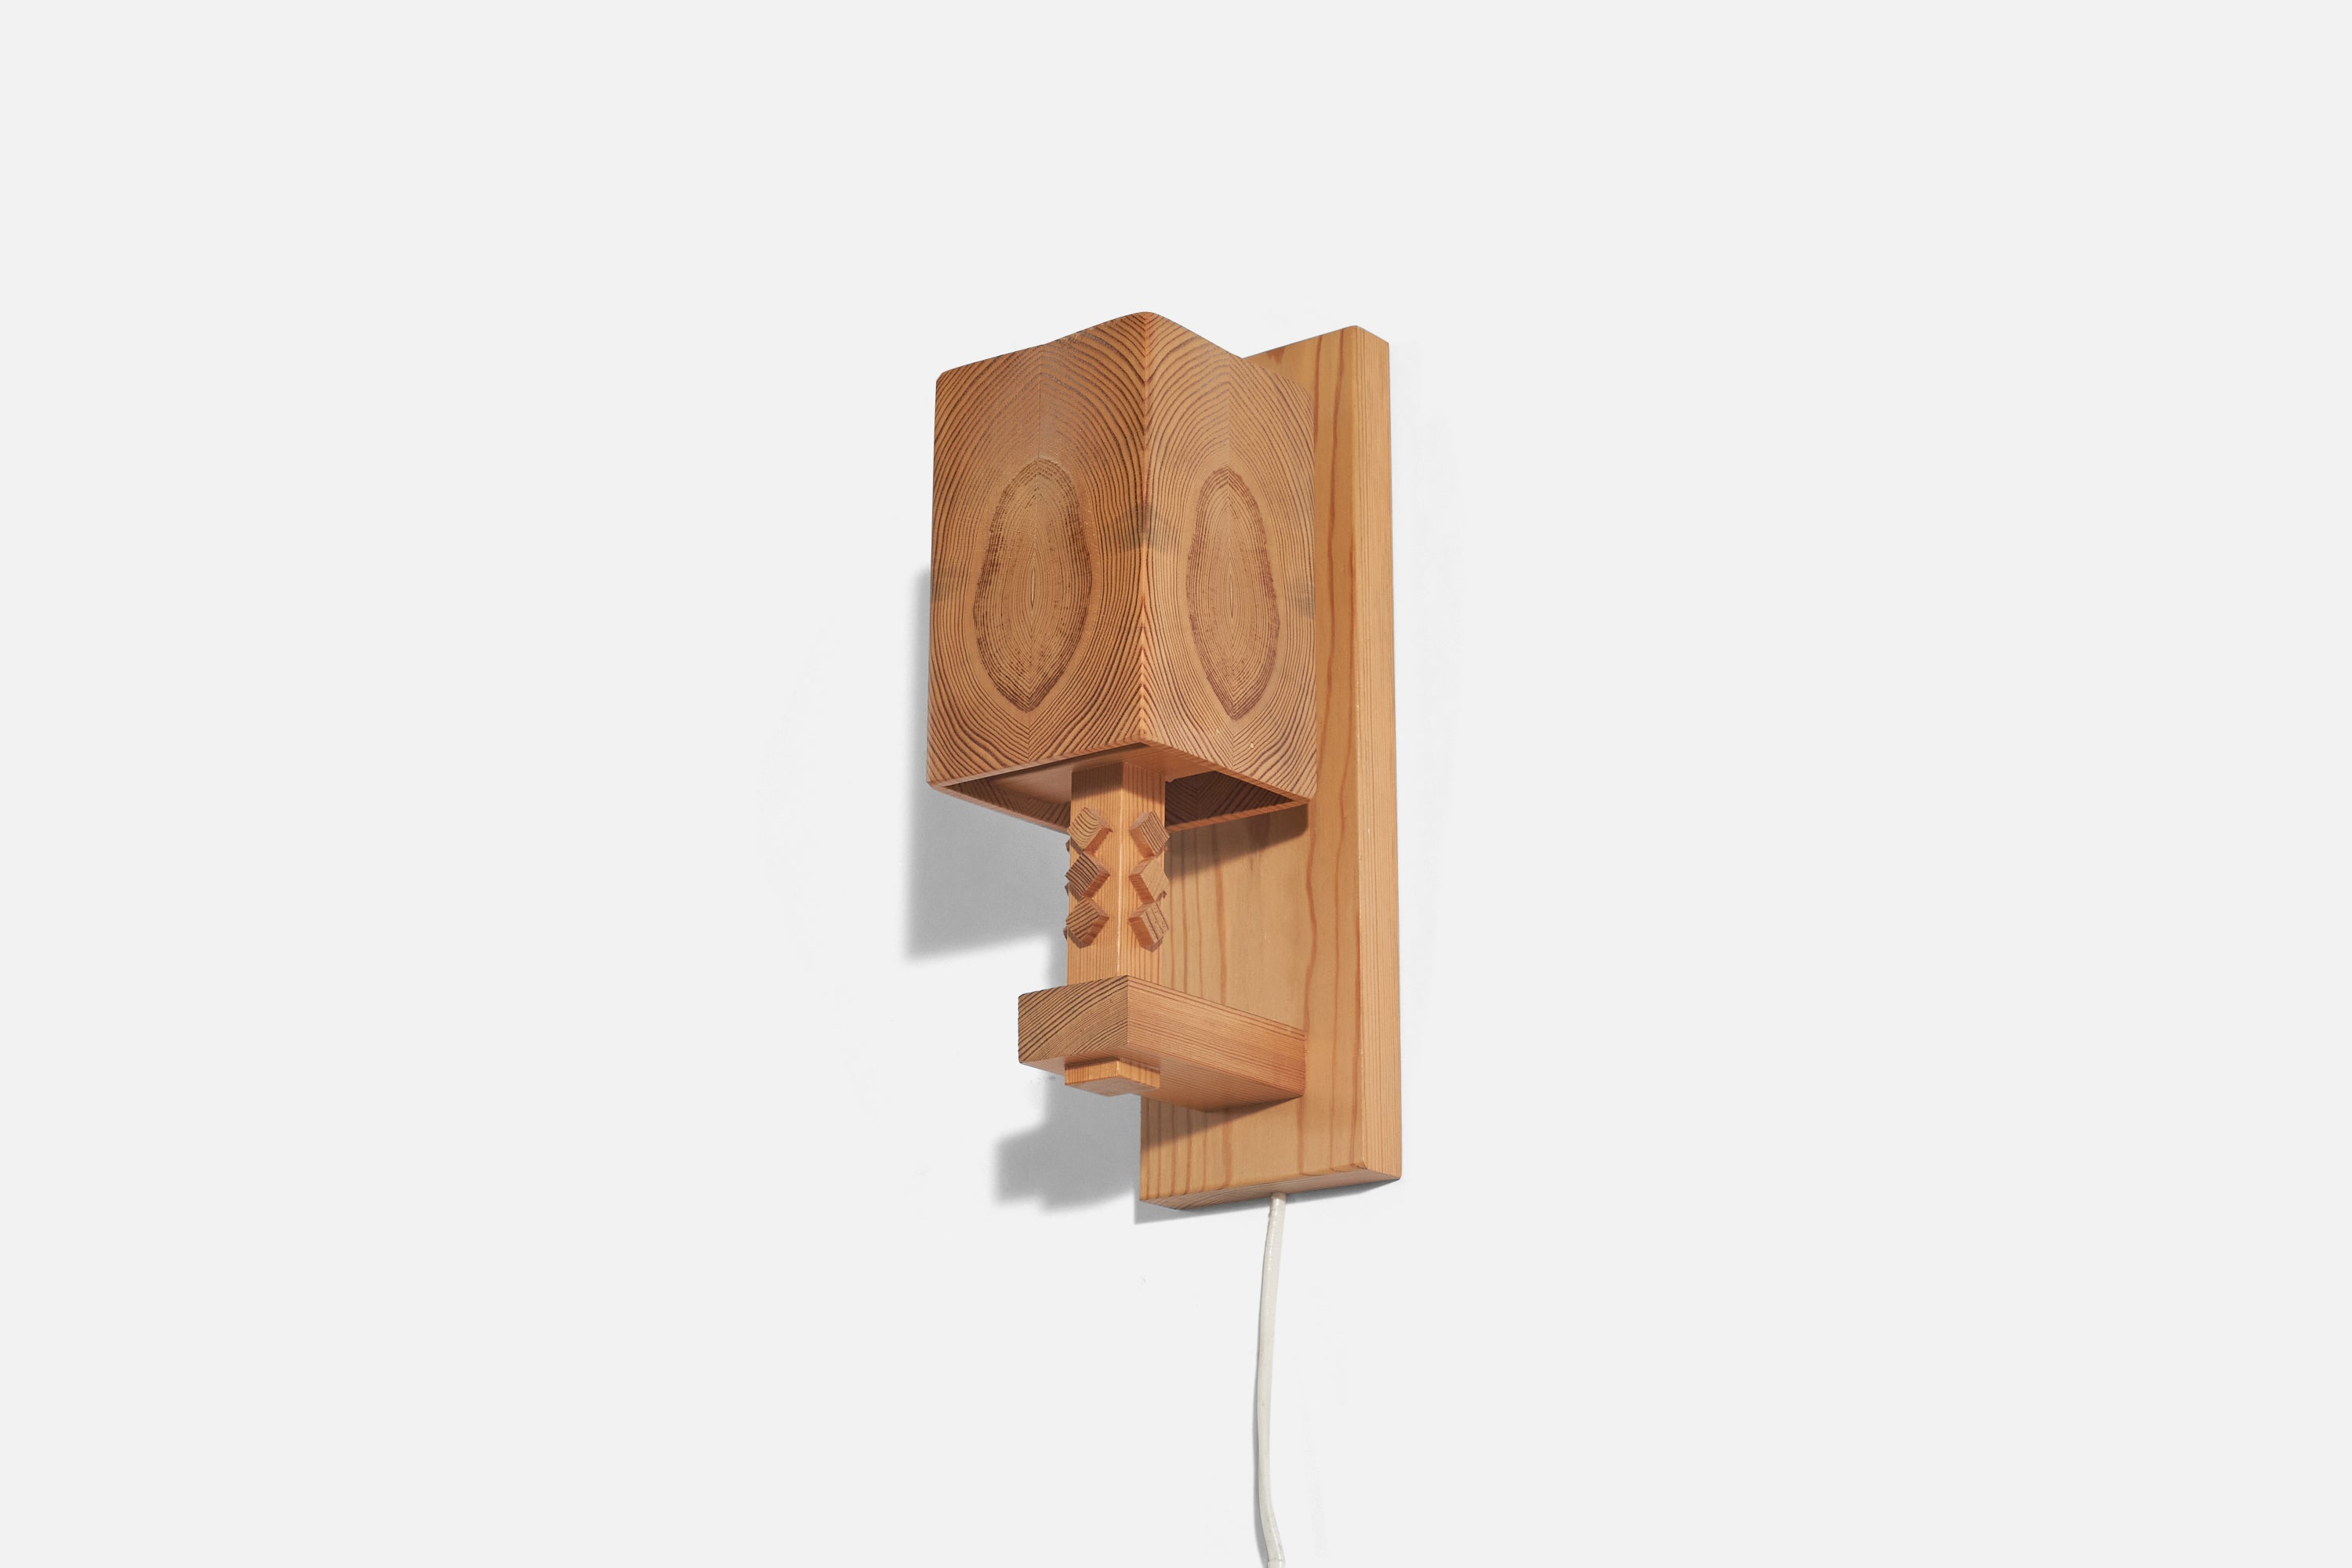 A pair of pine sconces designed by Leif Wikner and produced by Persåsen Kövra, Sweden, c. 1970s. 

